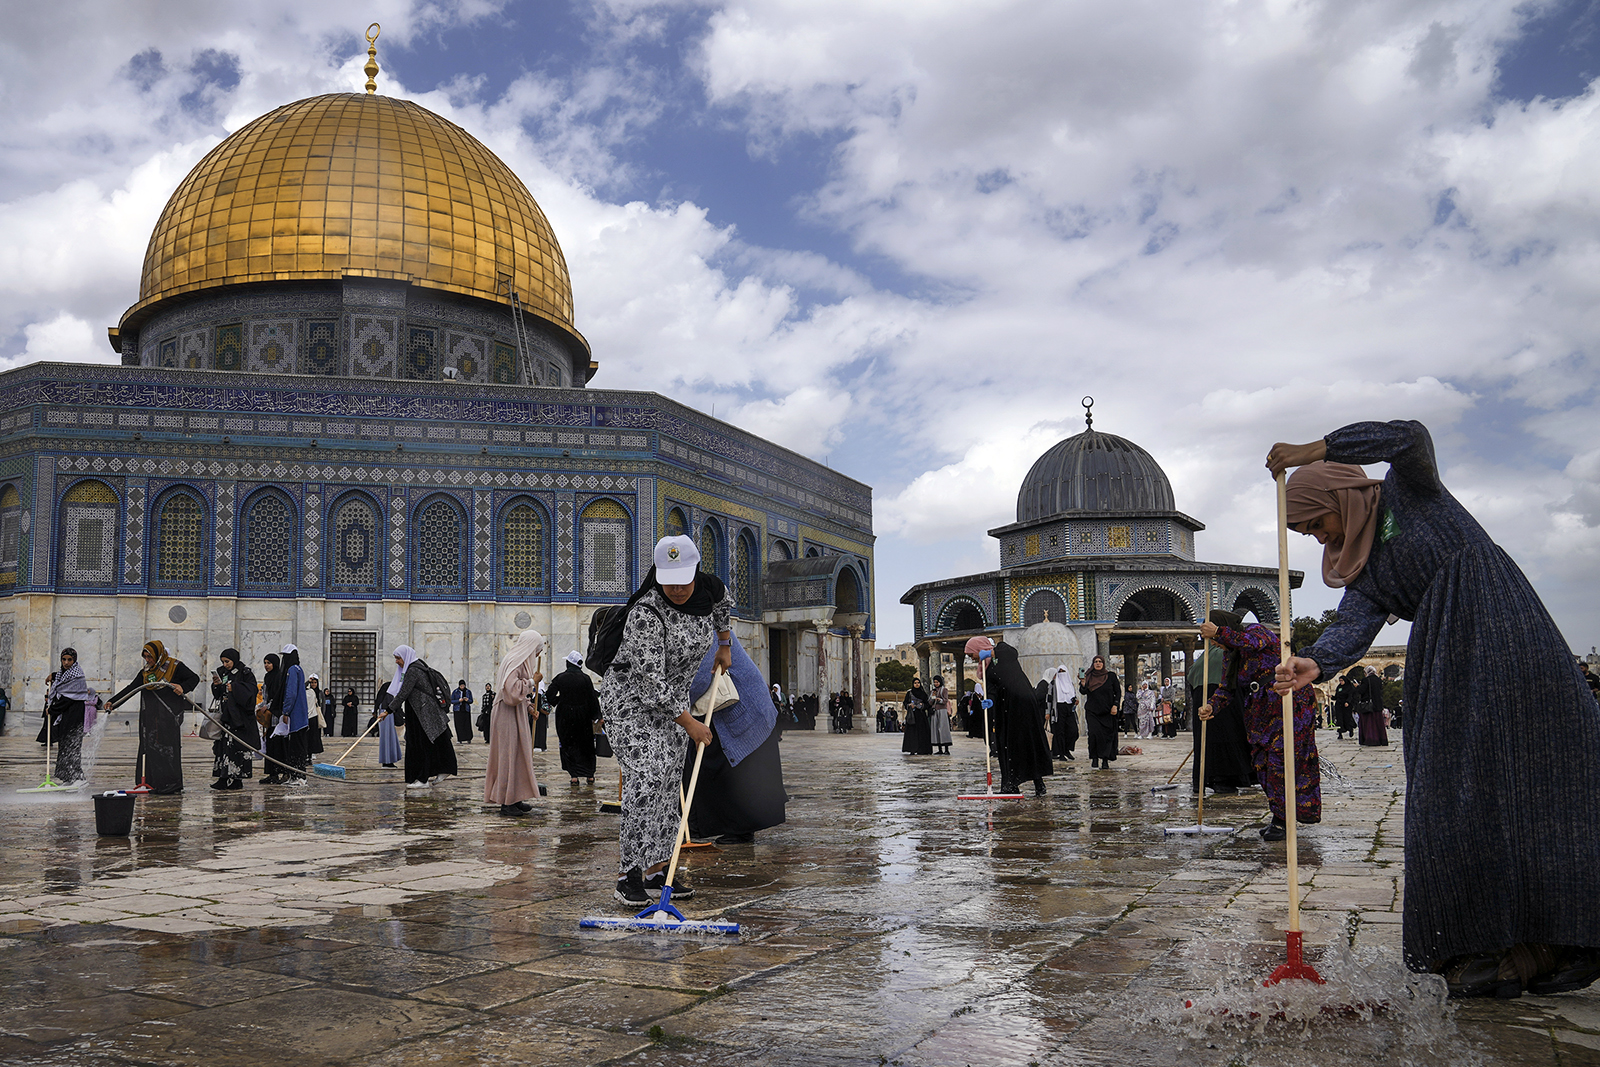 Palestinian volunteers clean the ground outside the Dome of Rock Mosque at the Al-Aqsa Mosque compound ahead of the Muslim holy month of Ramadan, in Jerusalem's Old City, Saturday, March 18, 2023. (AP Photo/Mahmoud Illean)